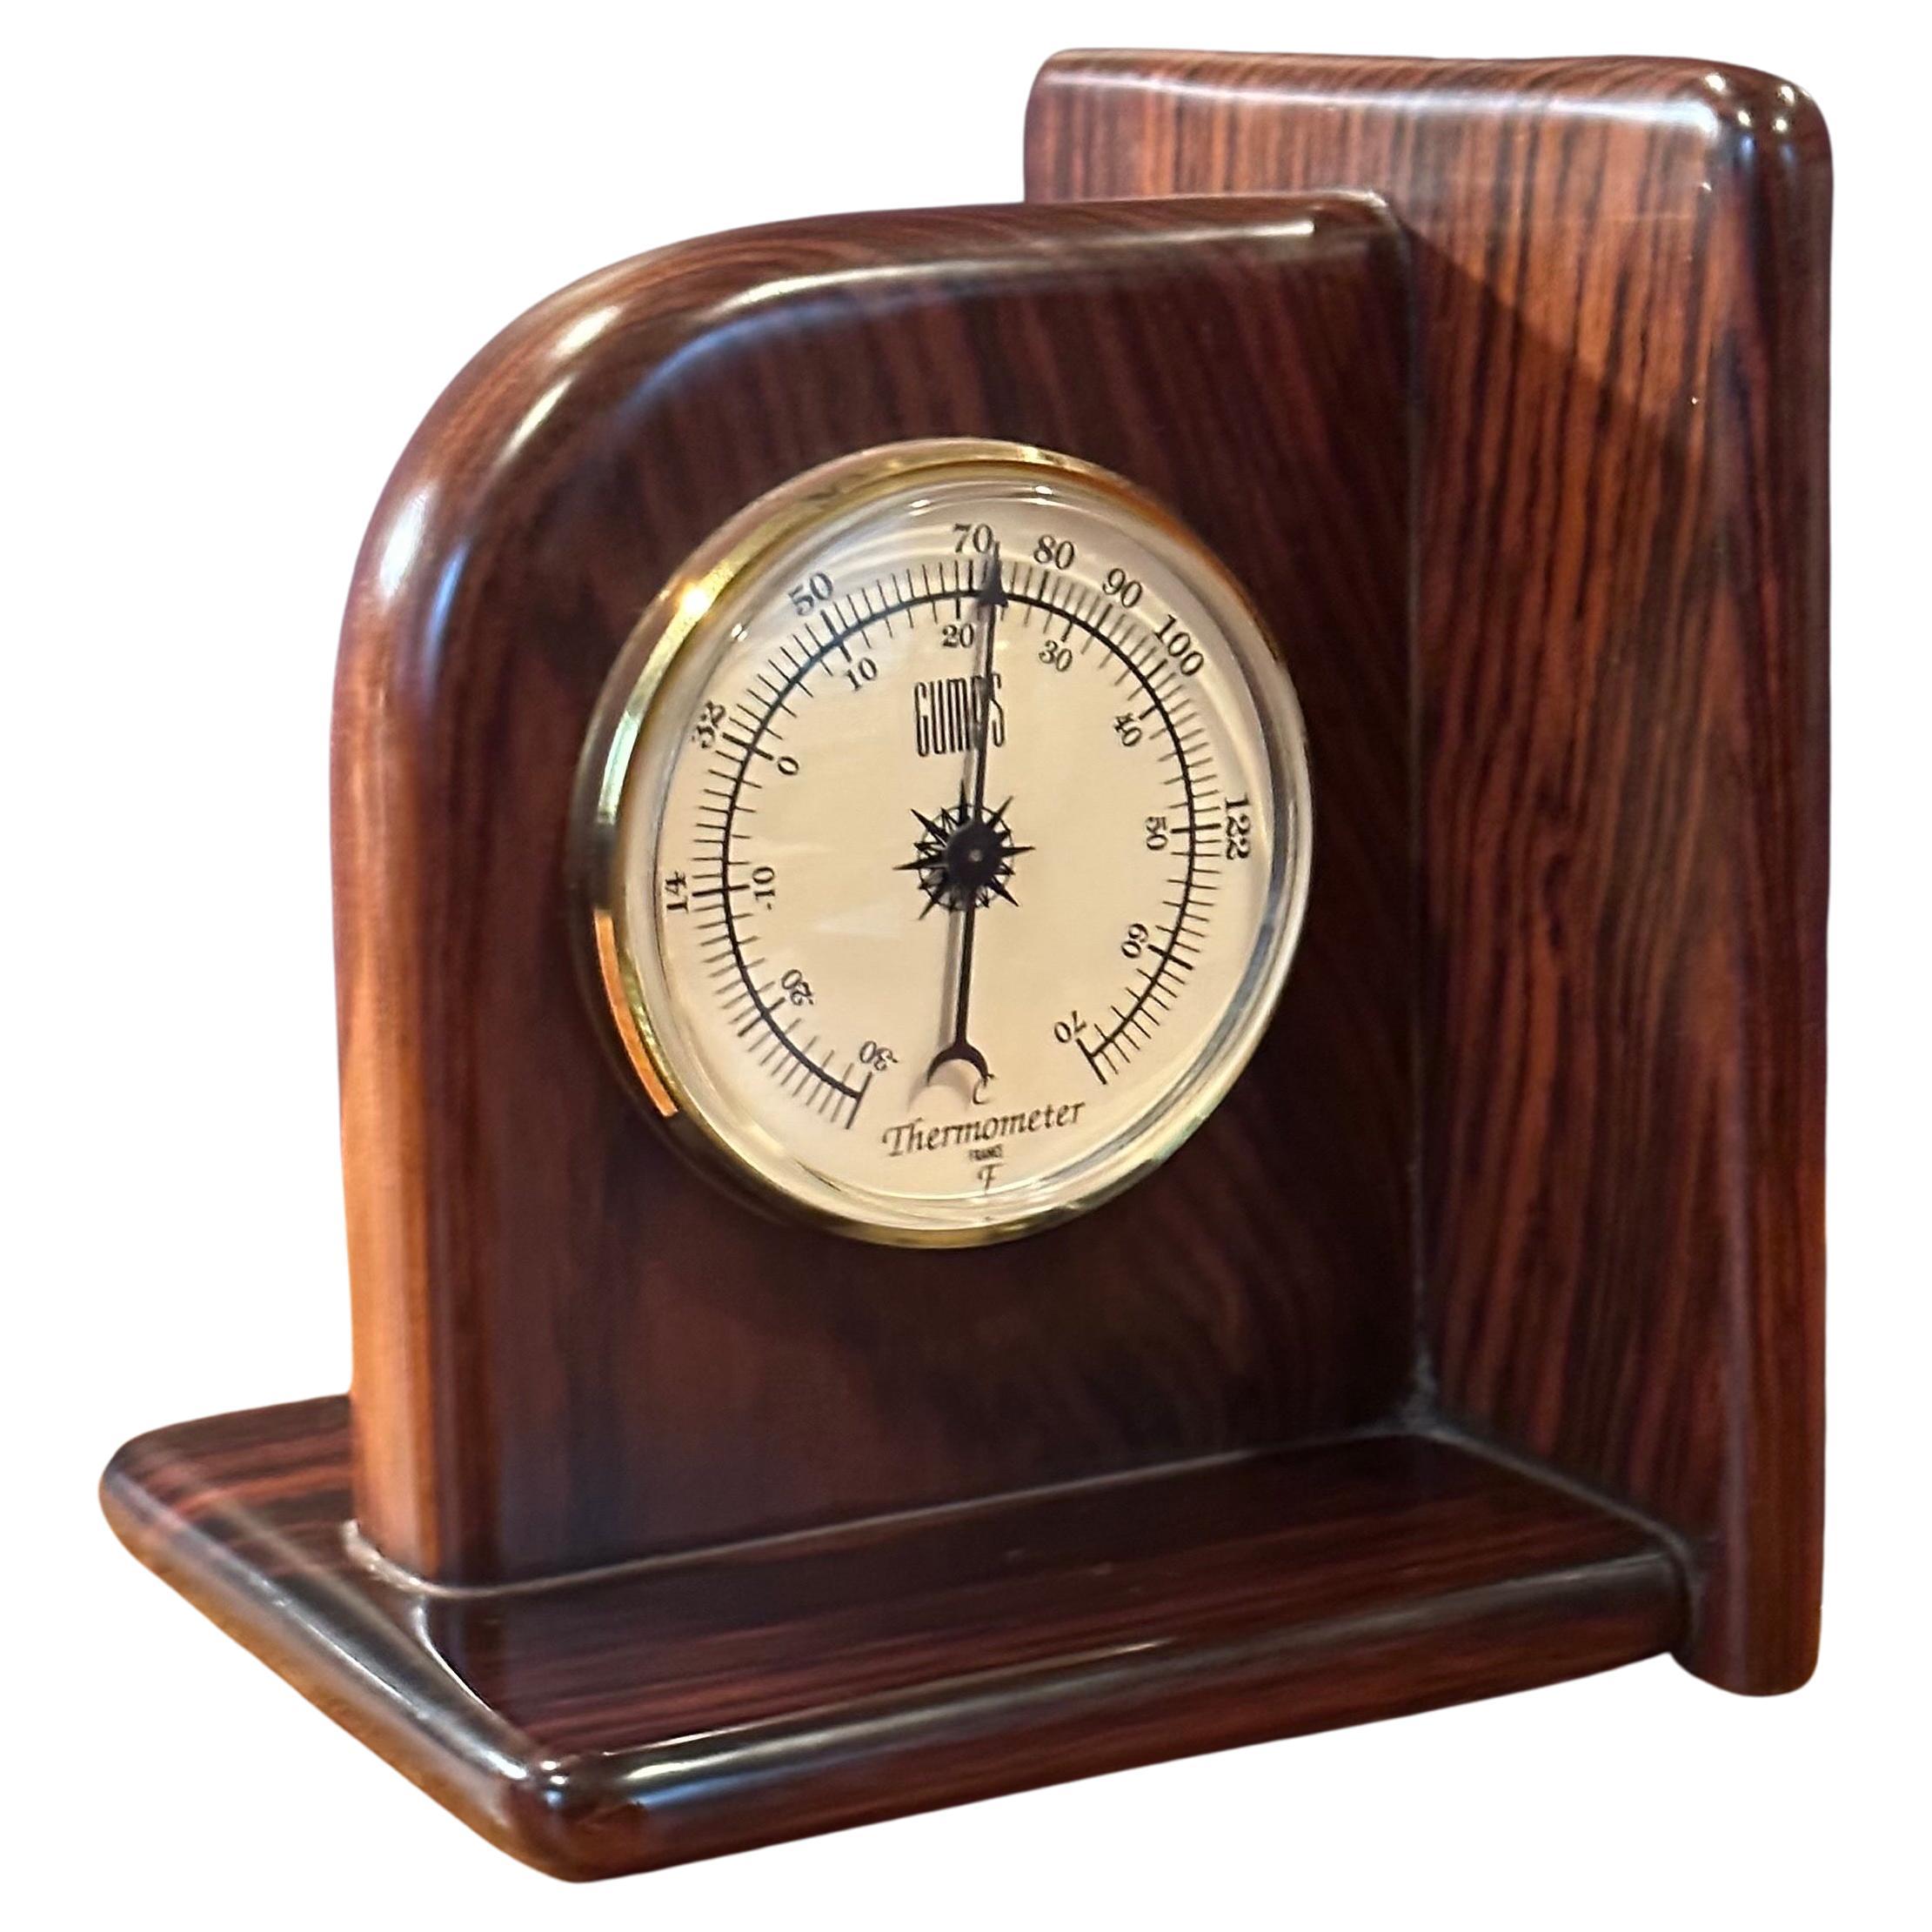 A really nice pair of rosewood bookends with clock and thermometer by Gumps, circa 1990s. This gorgeous rosewood set has wonderful grain patterns and a high quality quartz clock and thermometer which were made in France; the set measures: 13